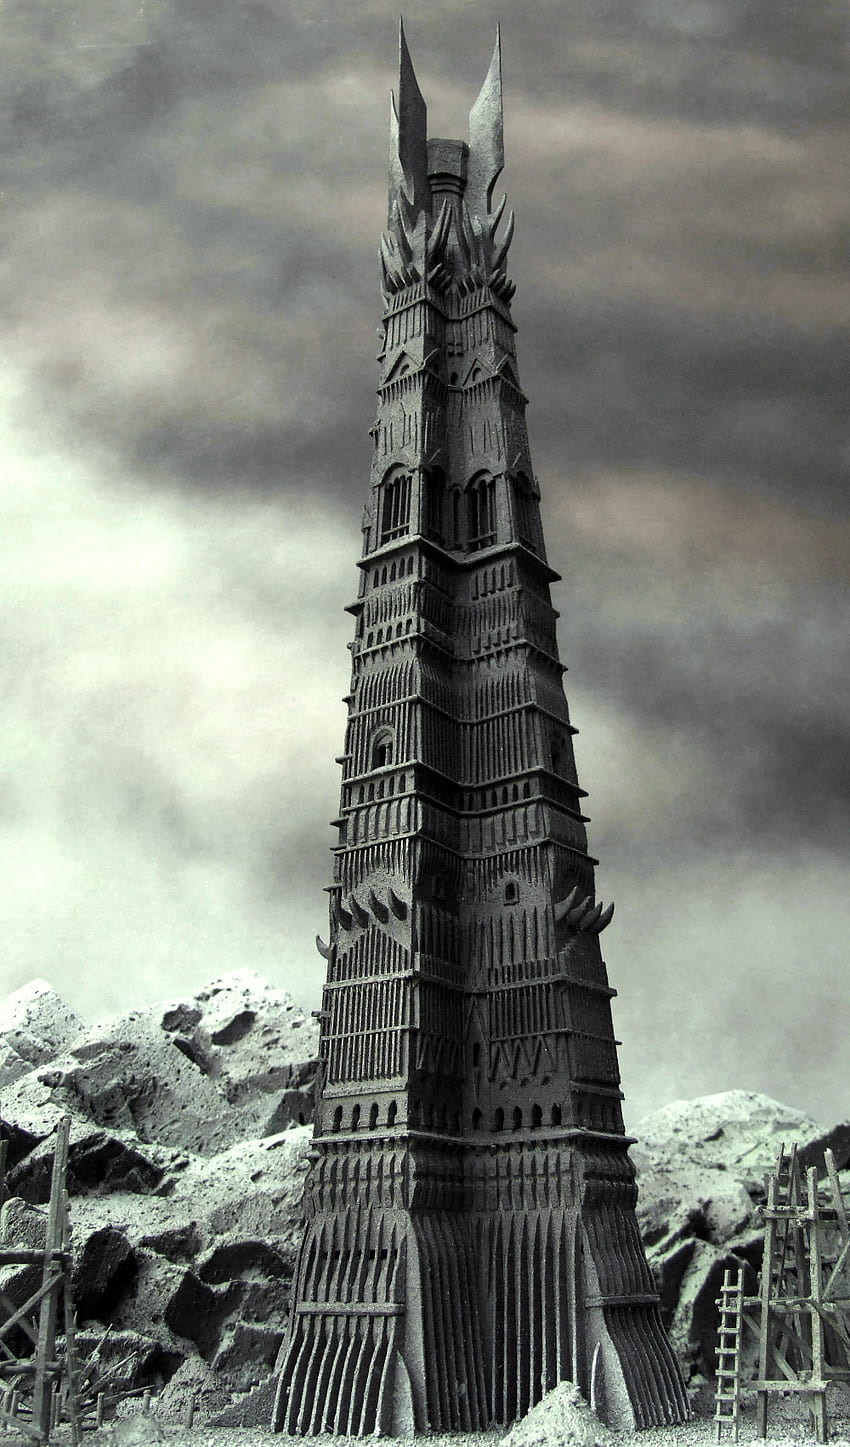 Build Orthanc, the Black Tower of Isengard (Saruman's Castle) in the Oregon Desert. World of darkness, Lord of the rings, Fantasy landscape HD phone wallpaper